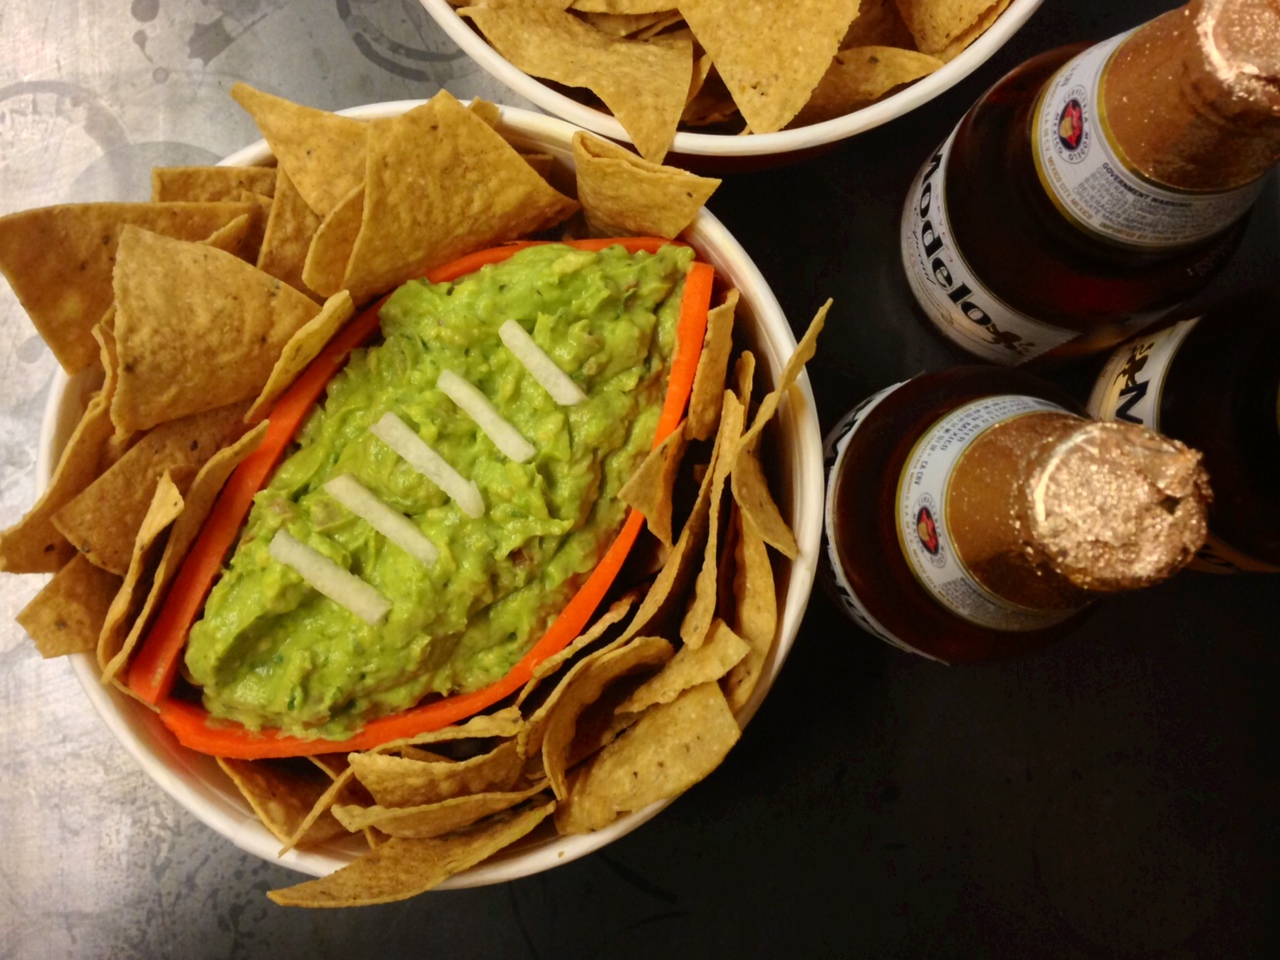 How to make chips and guacamole superbowl festive puesto